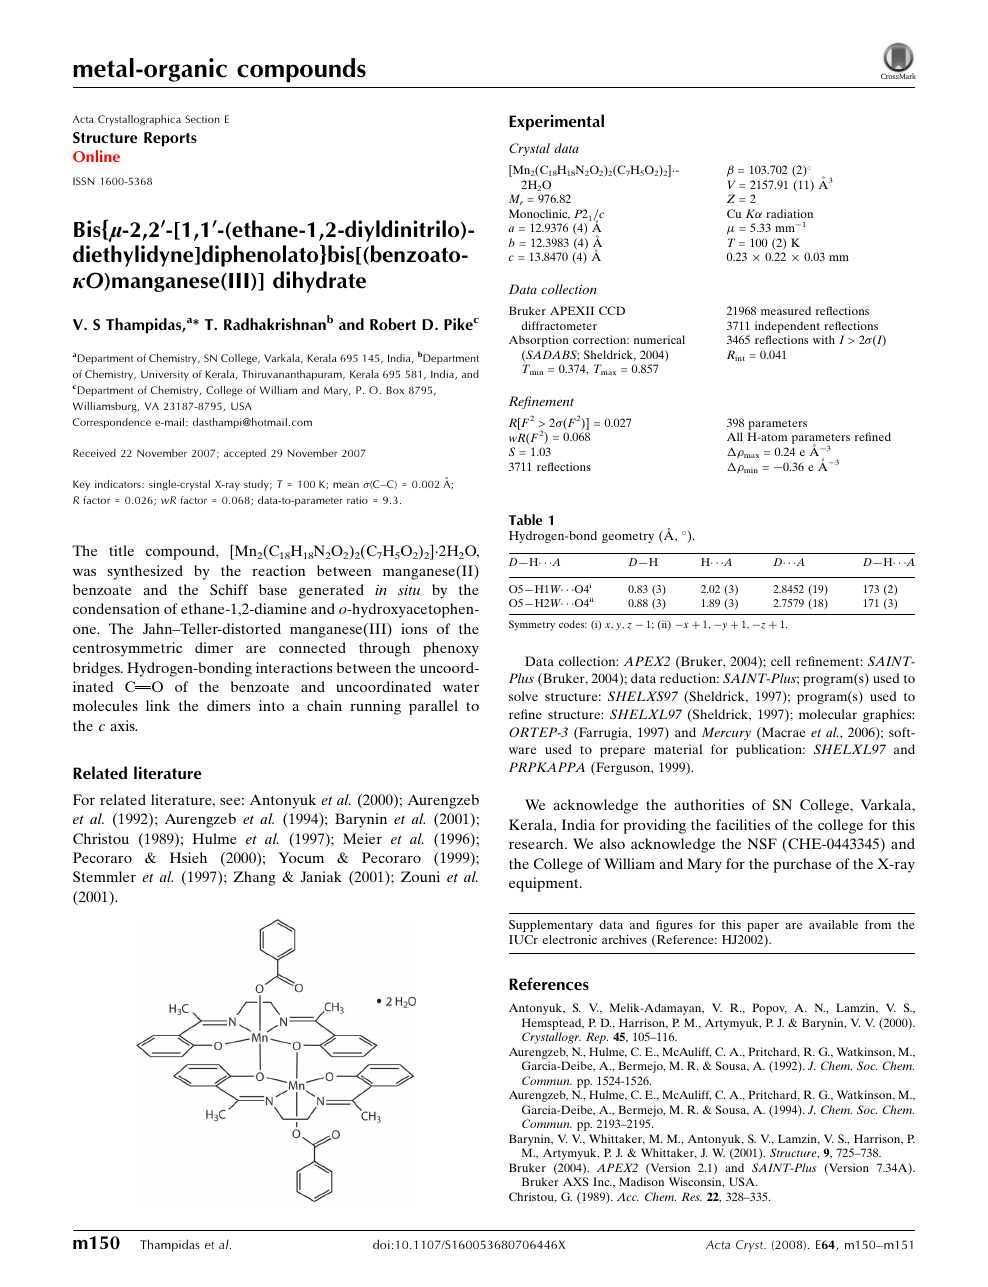 Bis M 2 2 1 1 Ethane 1 2 Diyldinitrilo Diethylidyne Diphenolato Bis Benzoato Ko Manganese Iii Dihydrate Topic Of Research Paper In Chemical Sciences Download Scholarly Article Pdf And Read For Free On Cyberleninka Open Science Hub